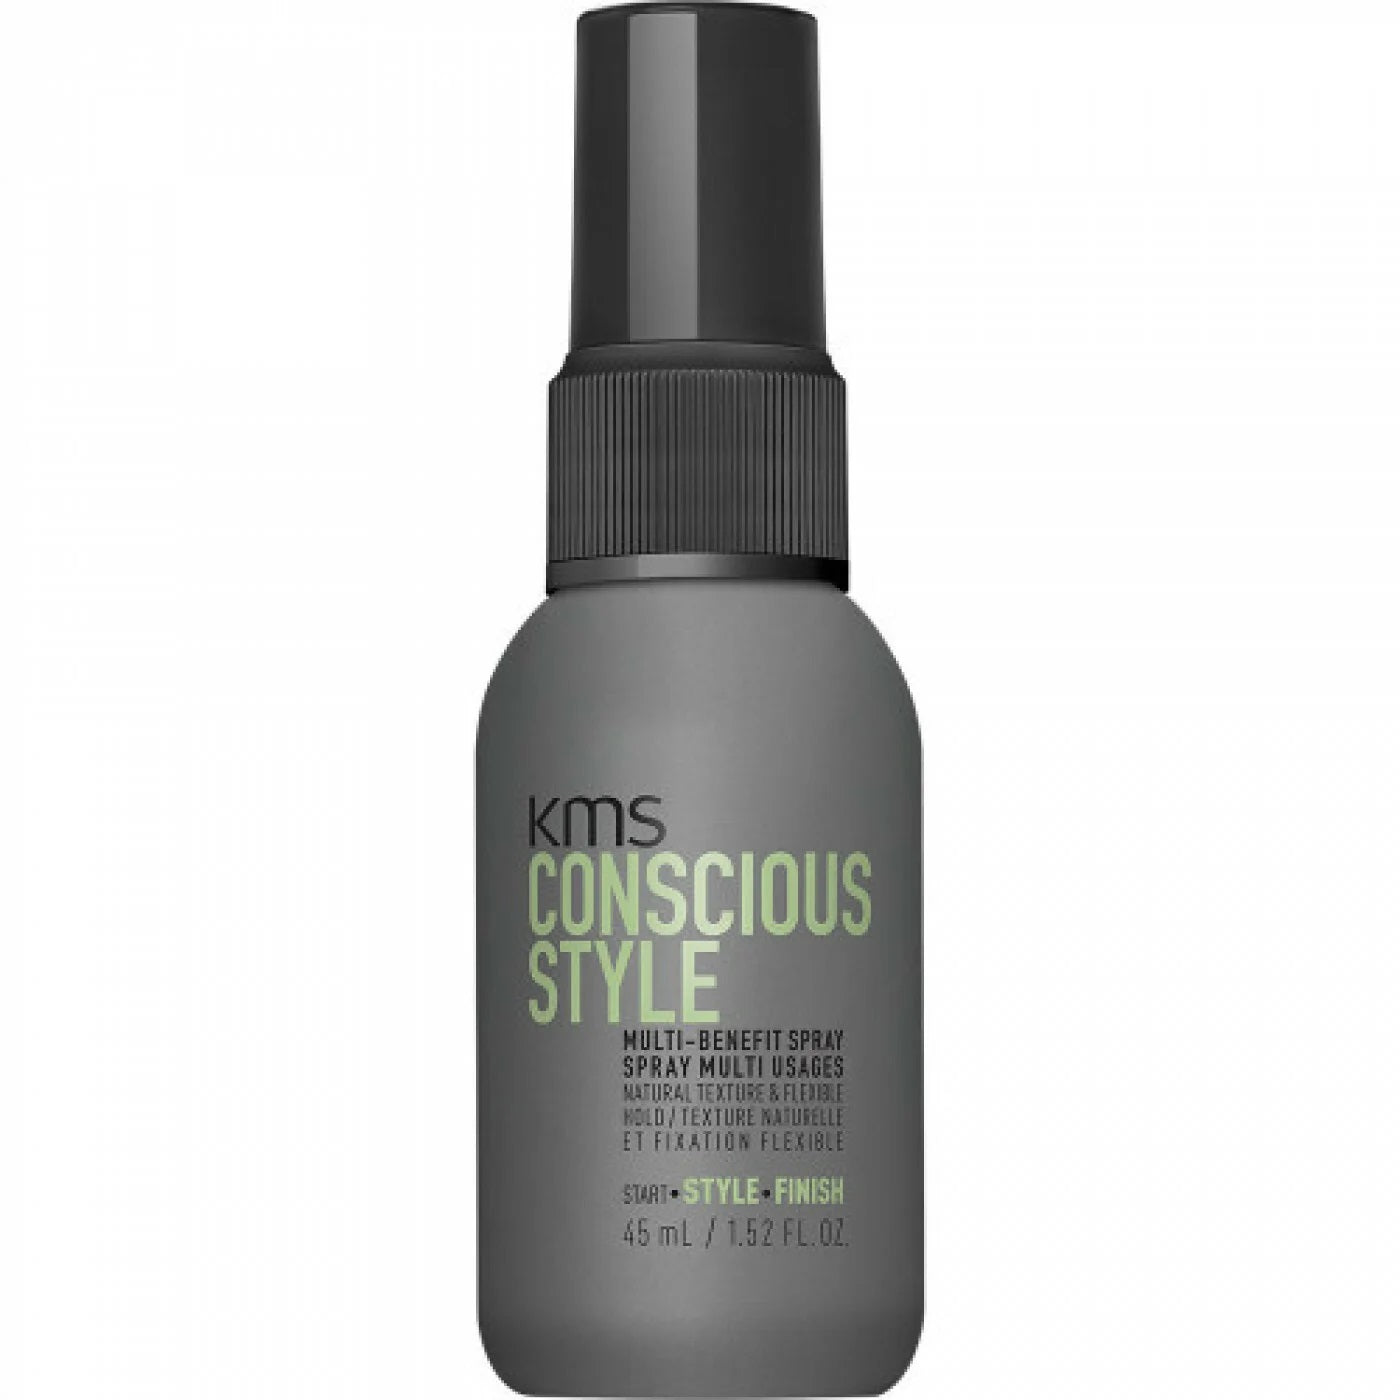 KMS Conscious Style Multi-Benefit Spray 45ml (Travel Size)